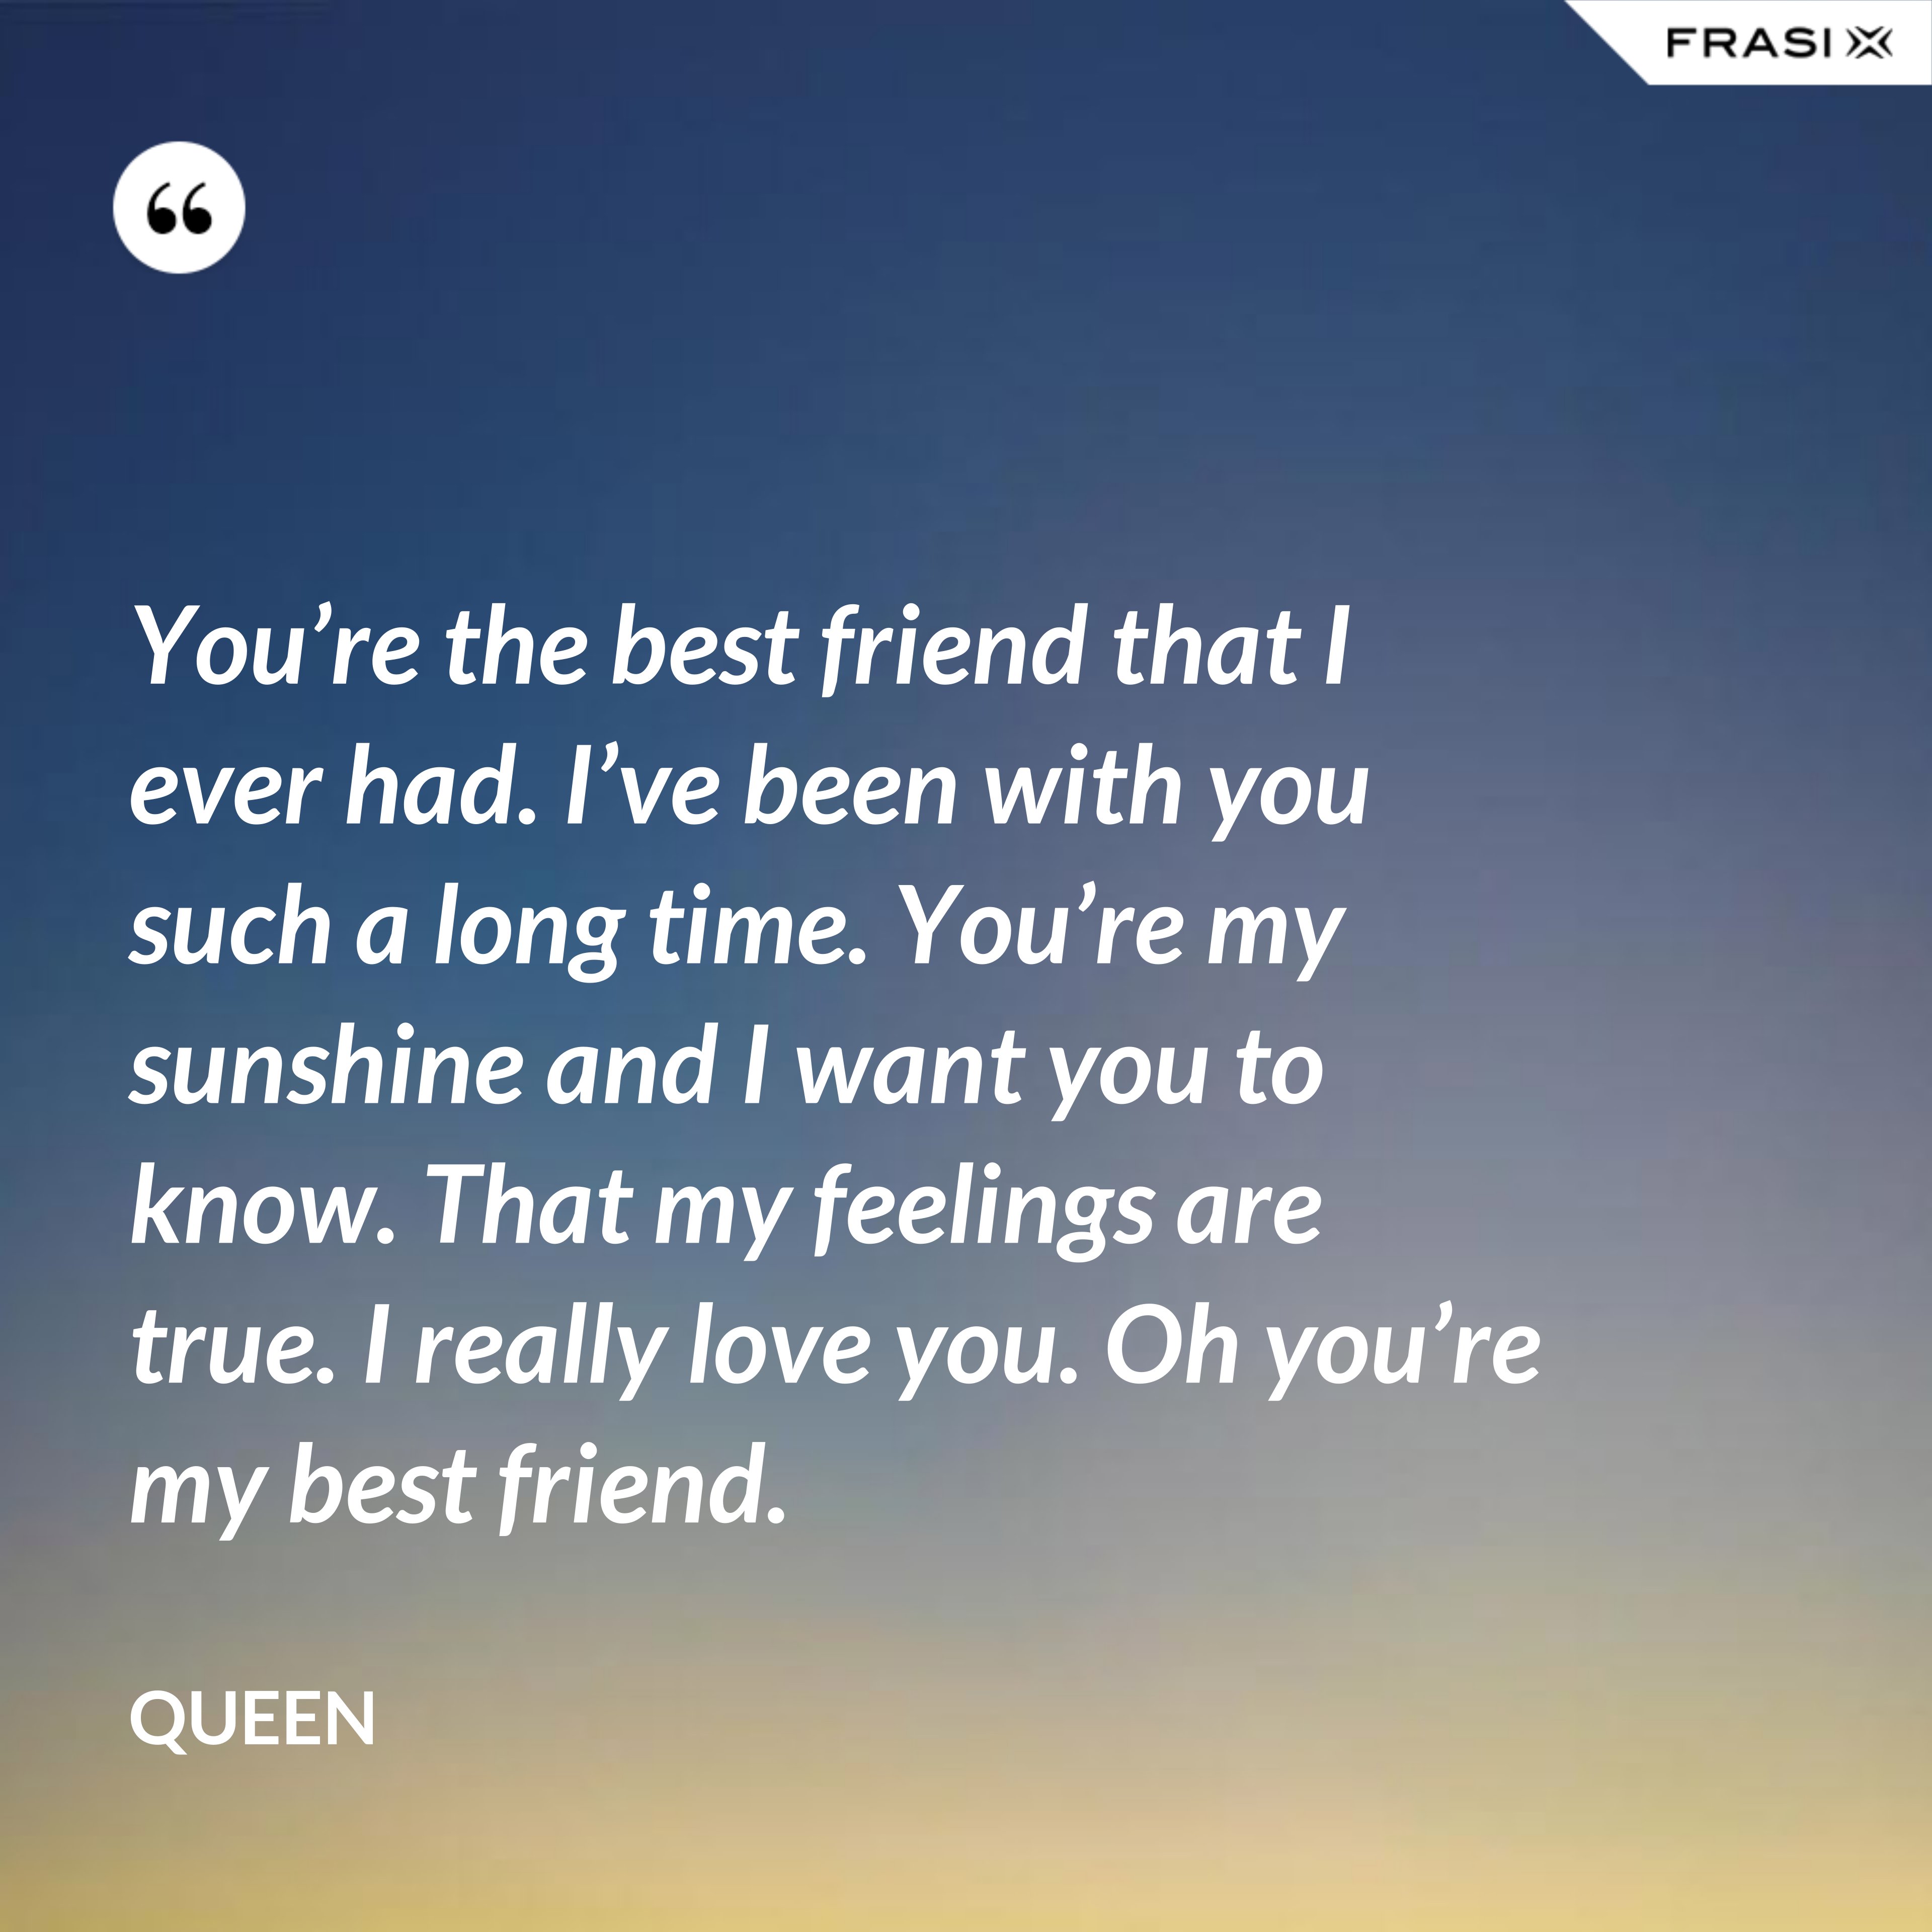 You’re the best friend that I ever had. I’ve been with you such a long time. You’re my sunshine and I want you to know. That my feelings are true. I really love you. Oh you’re my best friend. - Queen